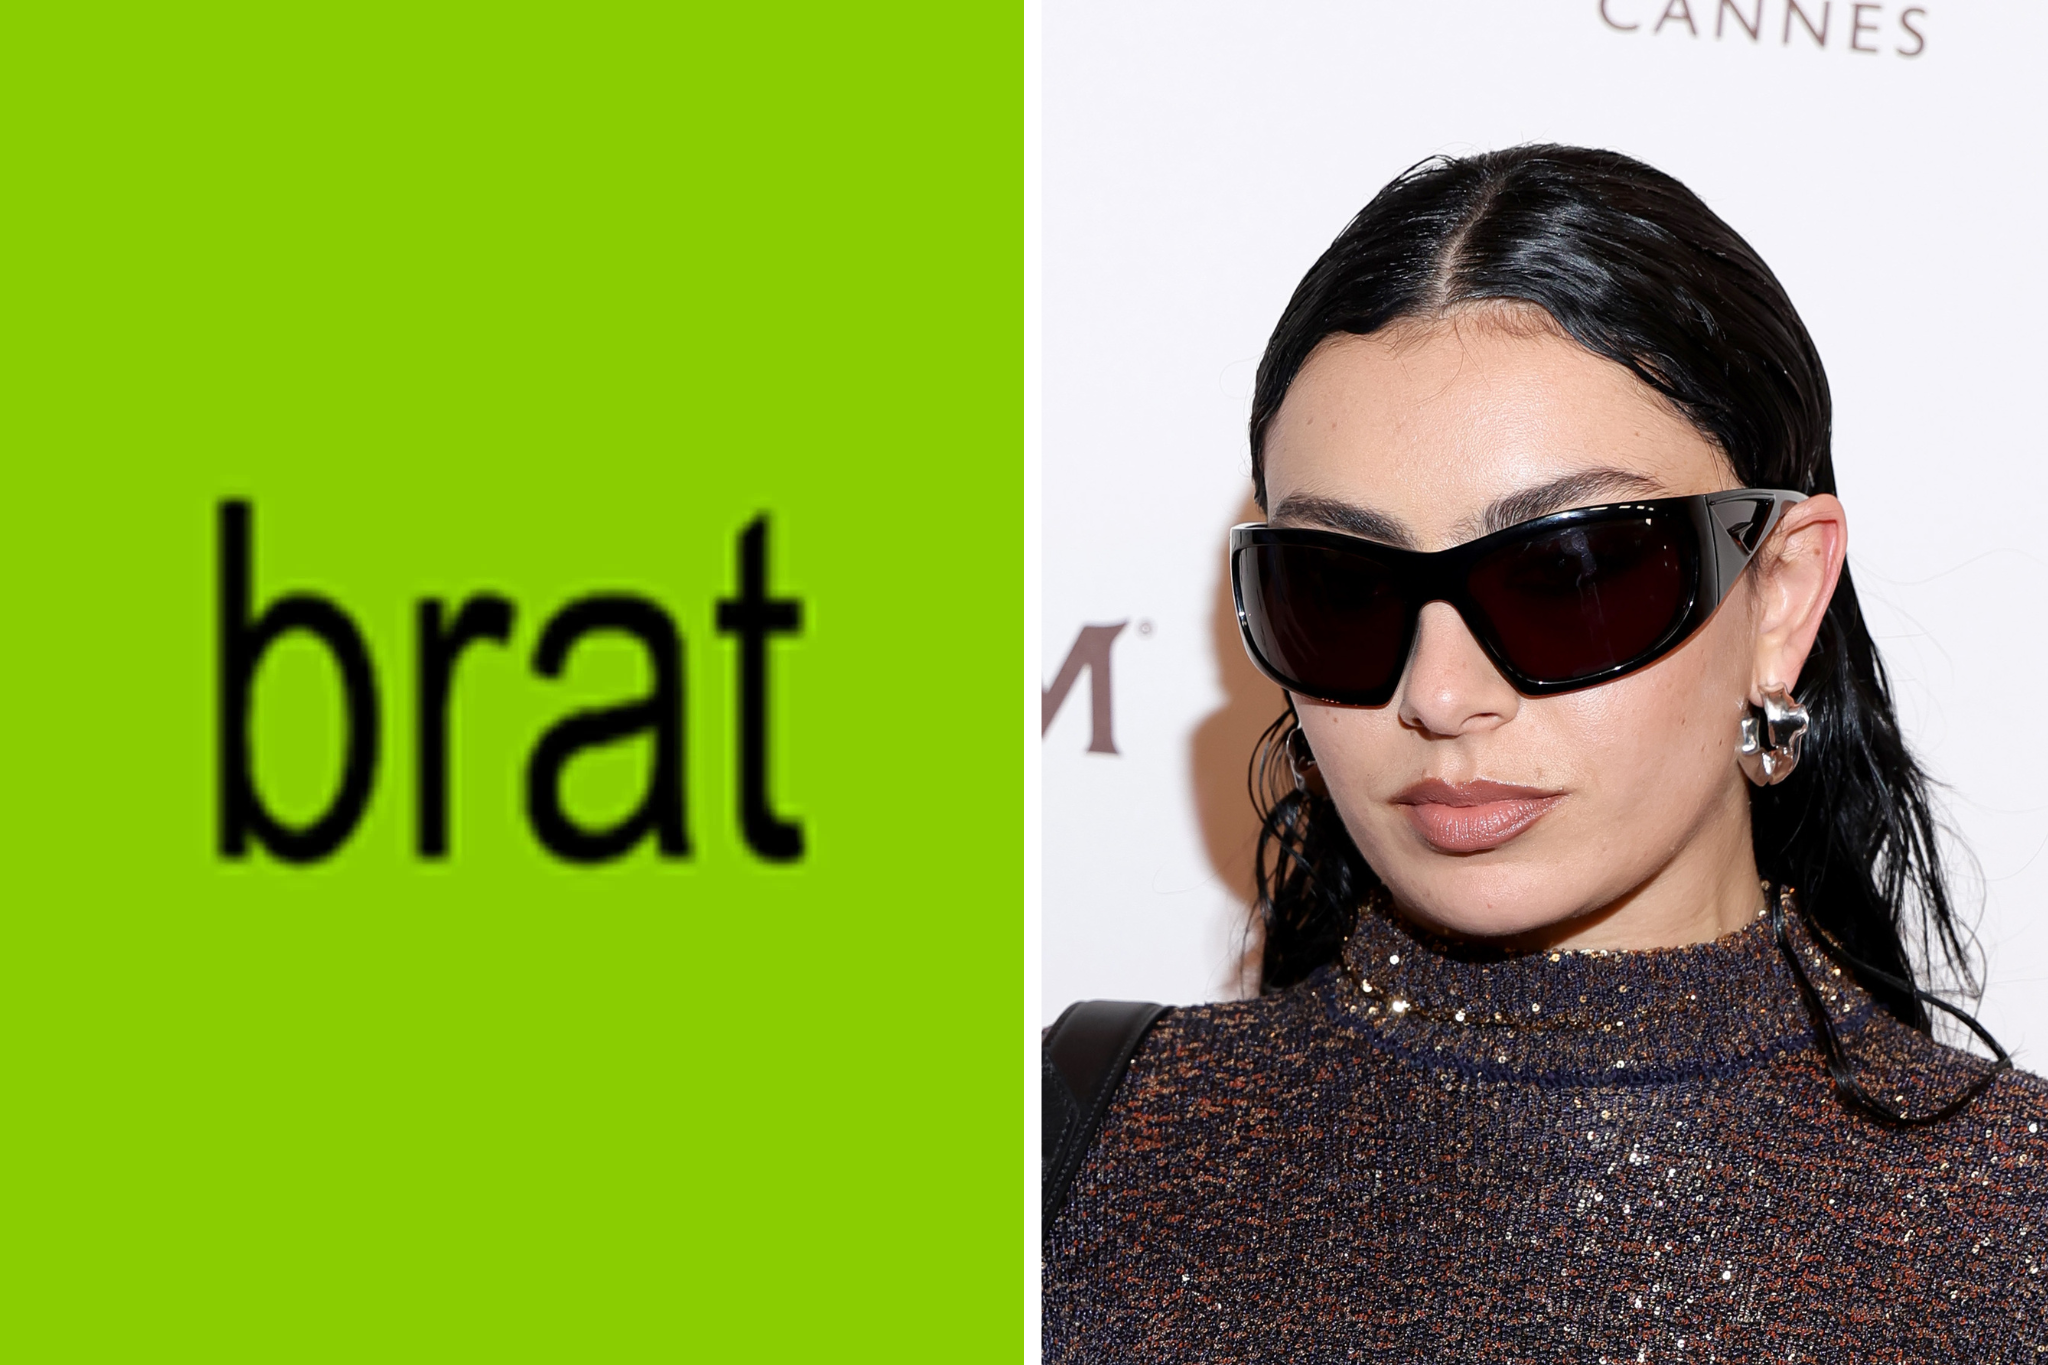 The Green Party have used the design of Charli XCX’s ‘Brat’ album artwork to encourage votes in the general election